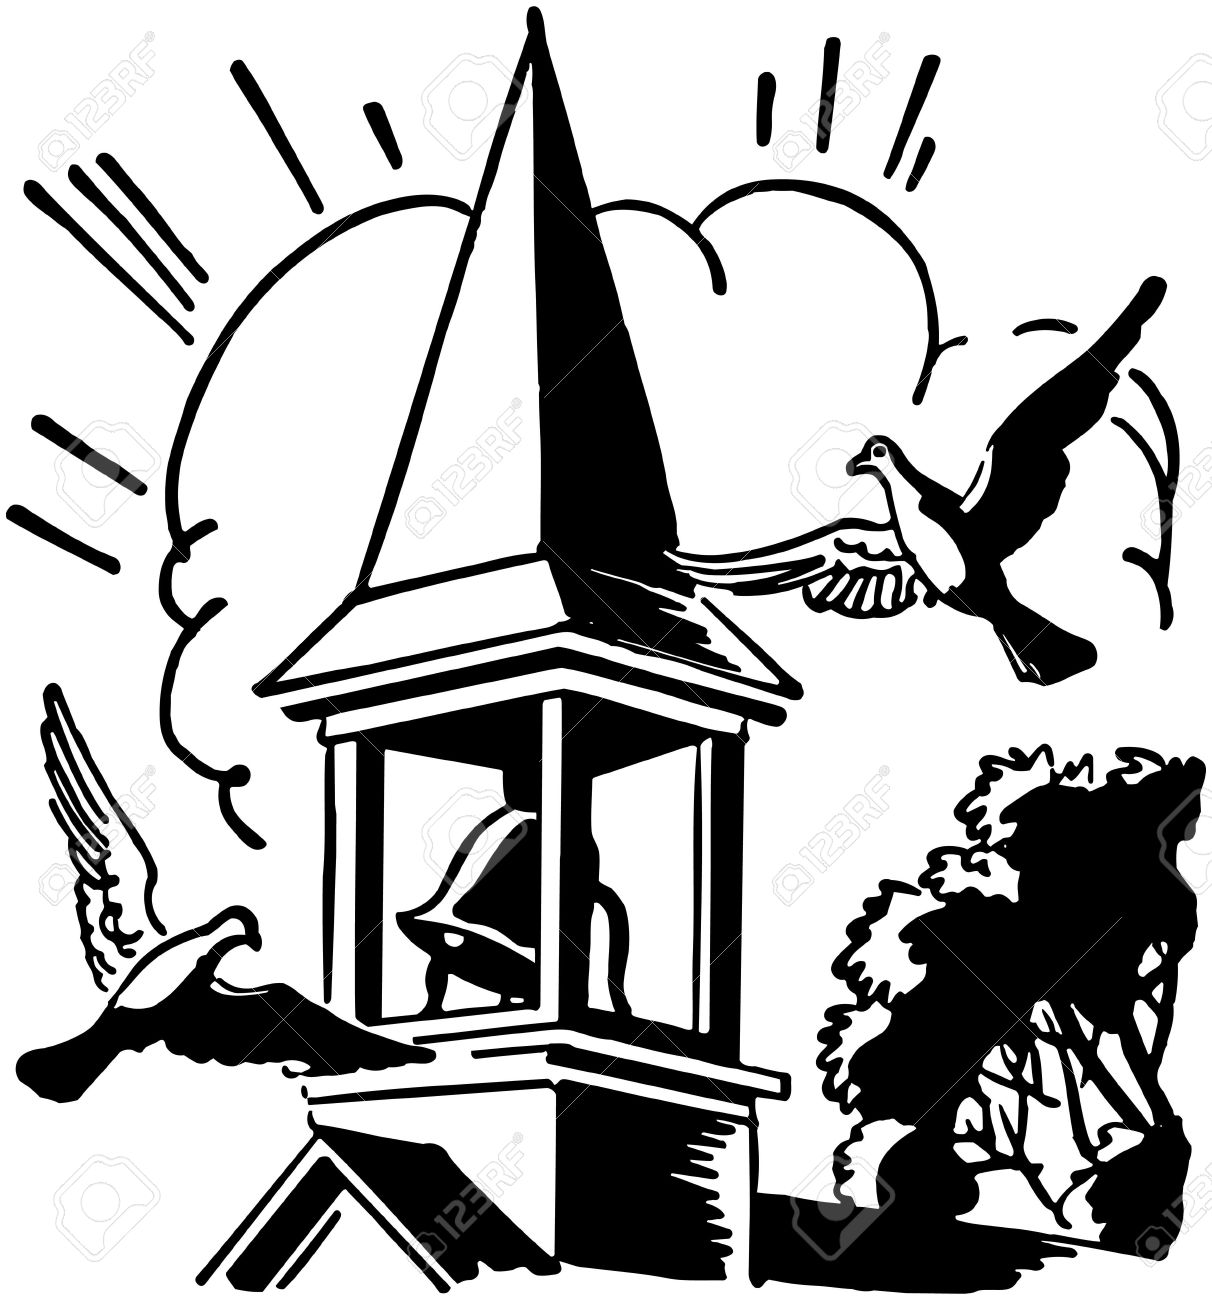 Bell tower clipart - Clipground